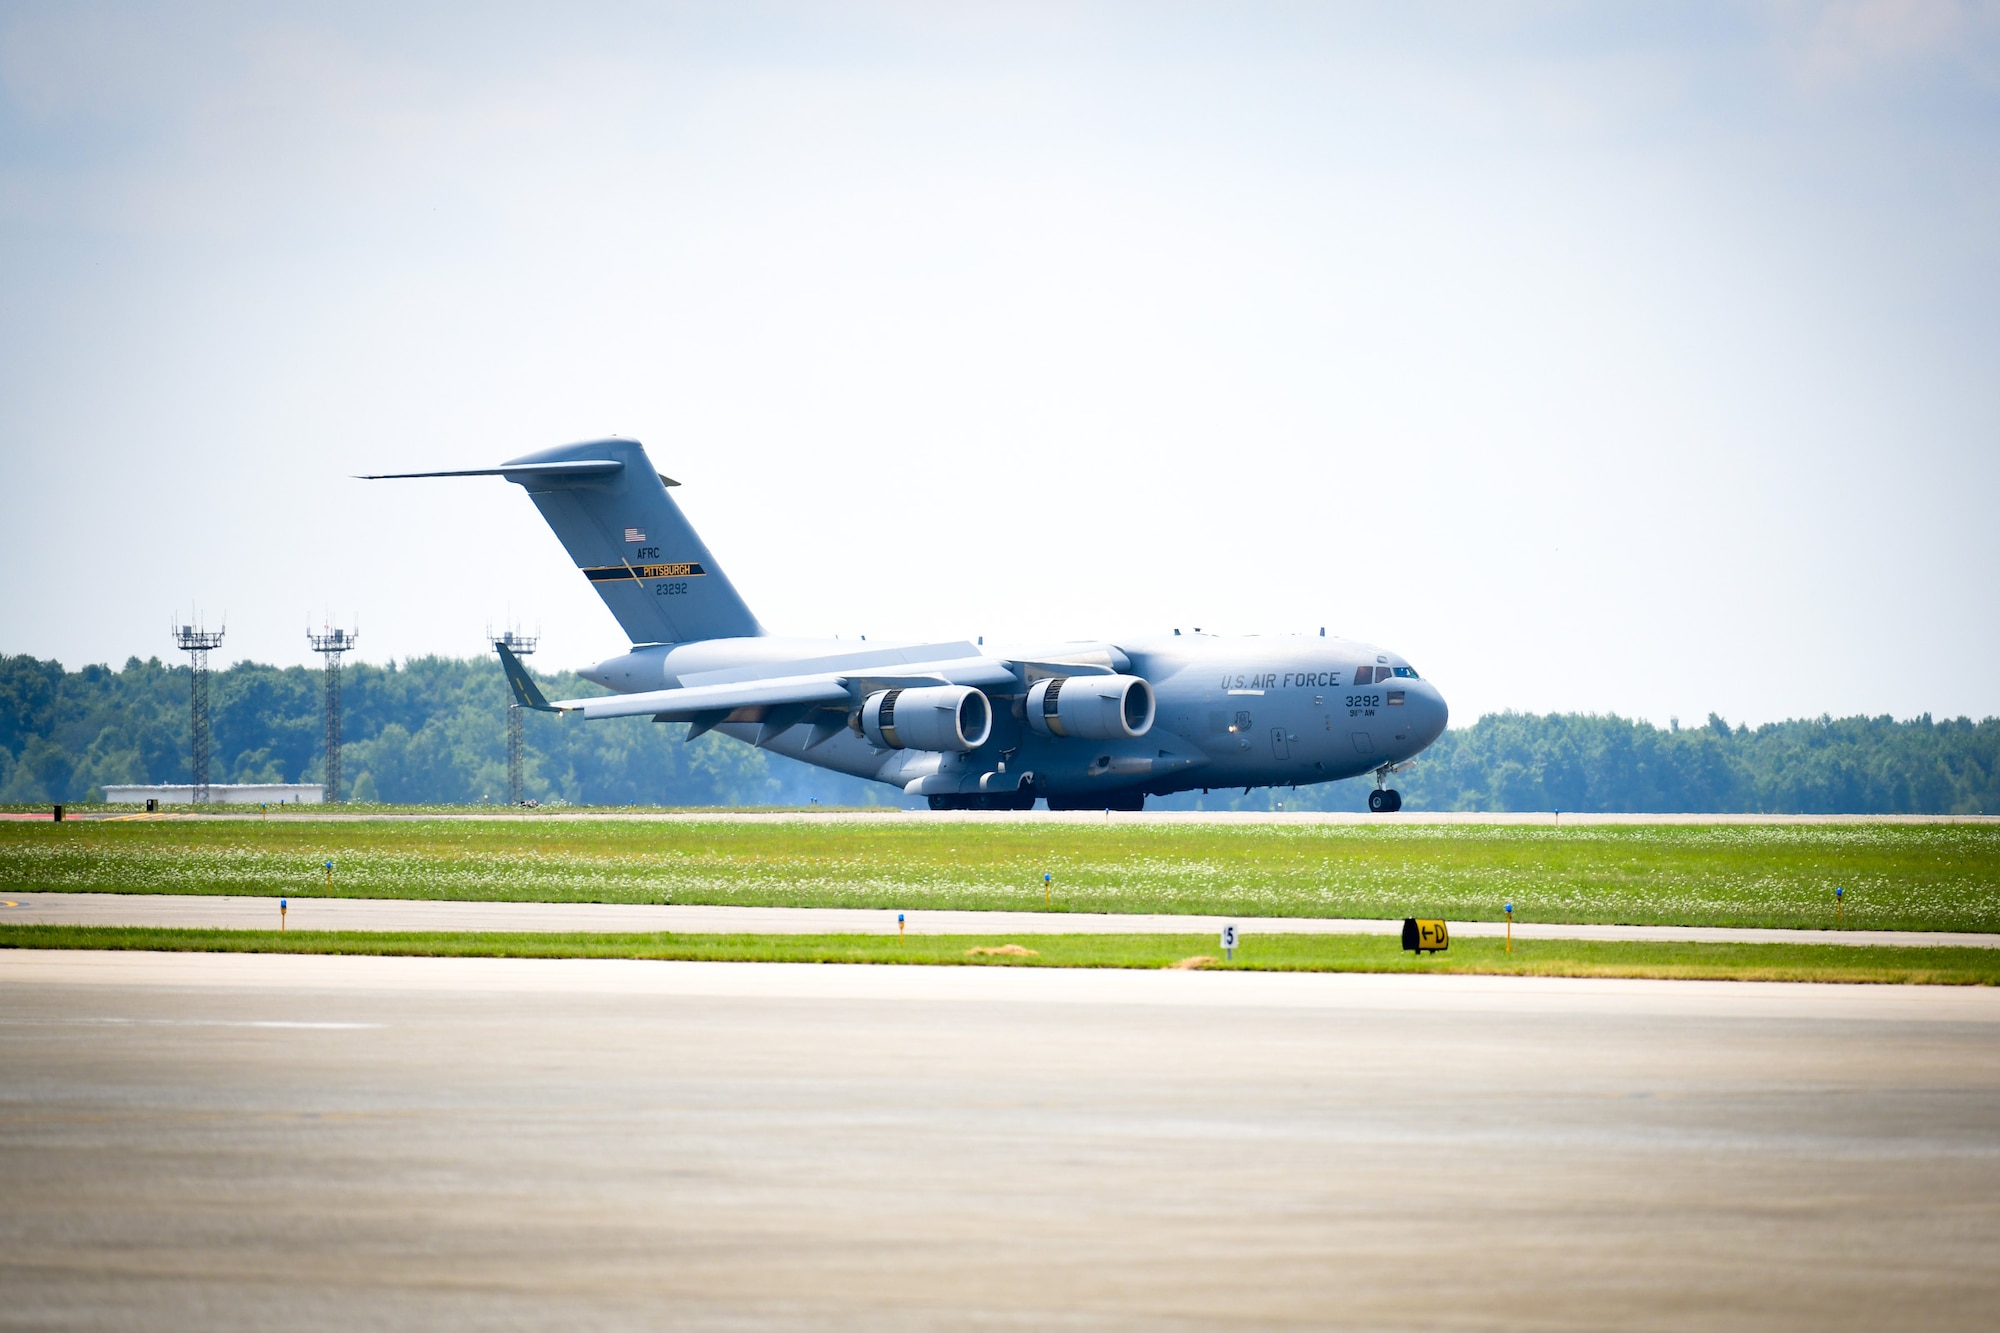 A trio of C-17 aircraft from Pittsburgh Air Reserve Station, Pennsylvania, was one of a trio of aircraft making use of the local runway and uncongested airspace for training.